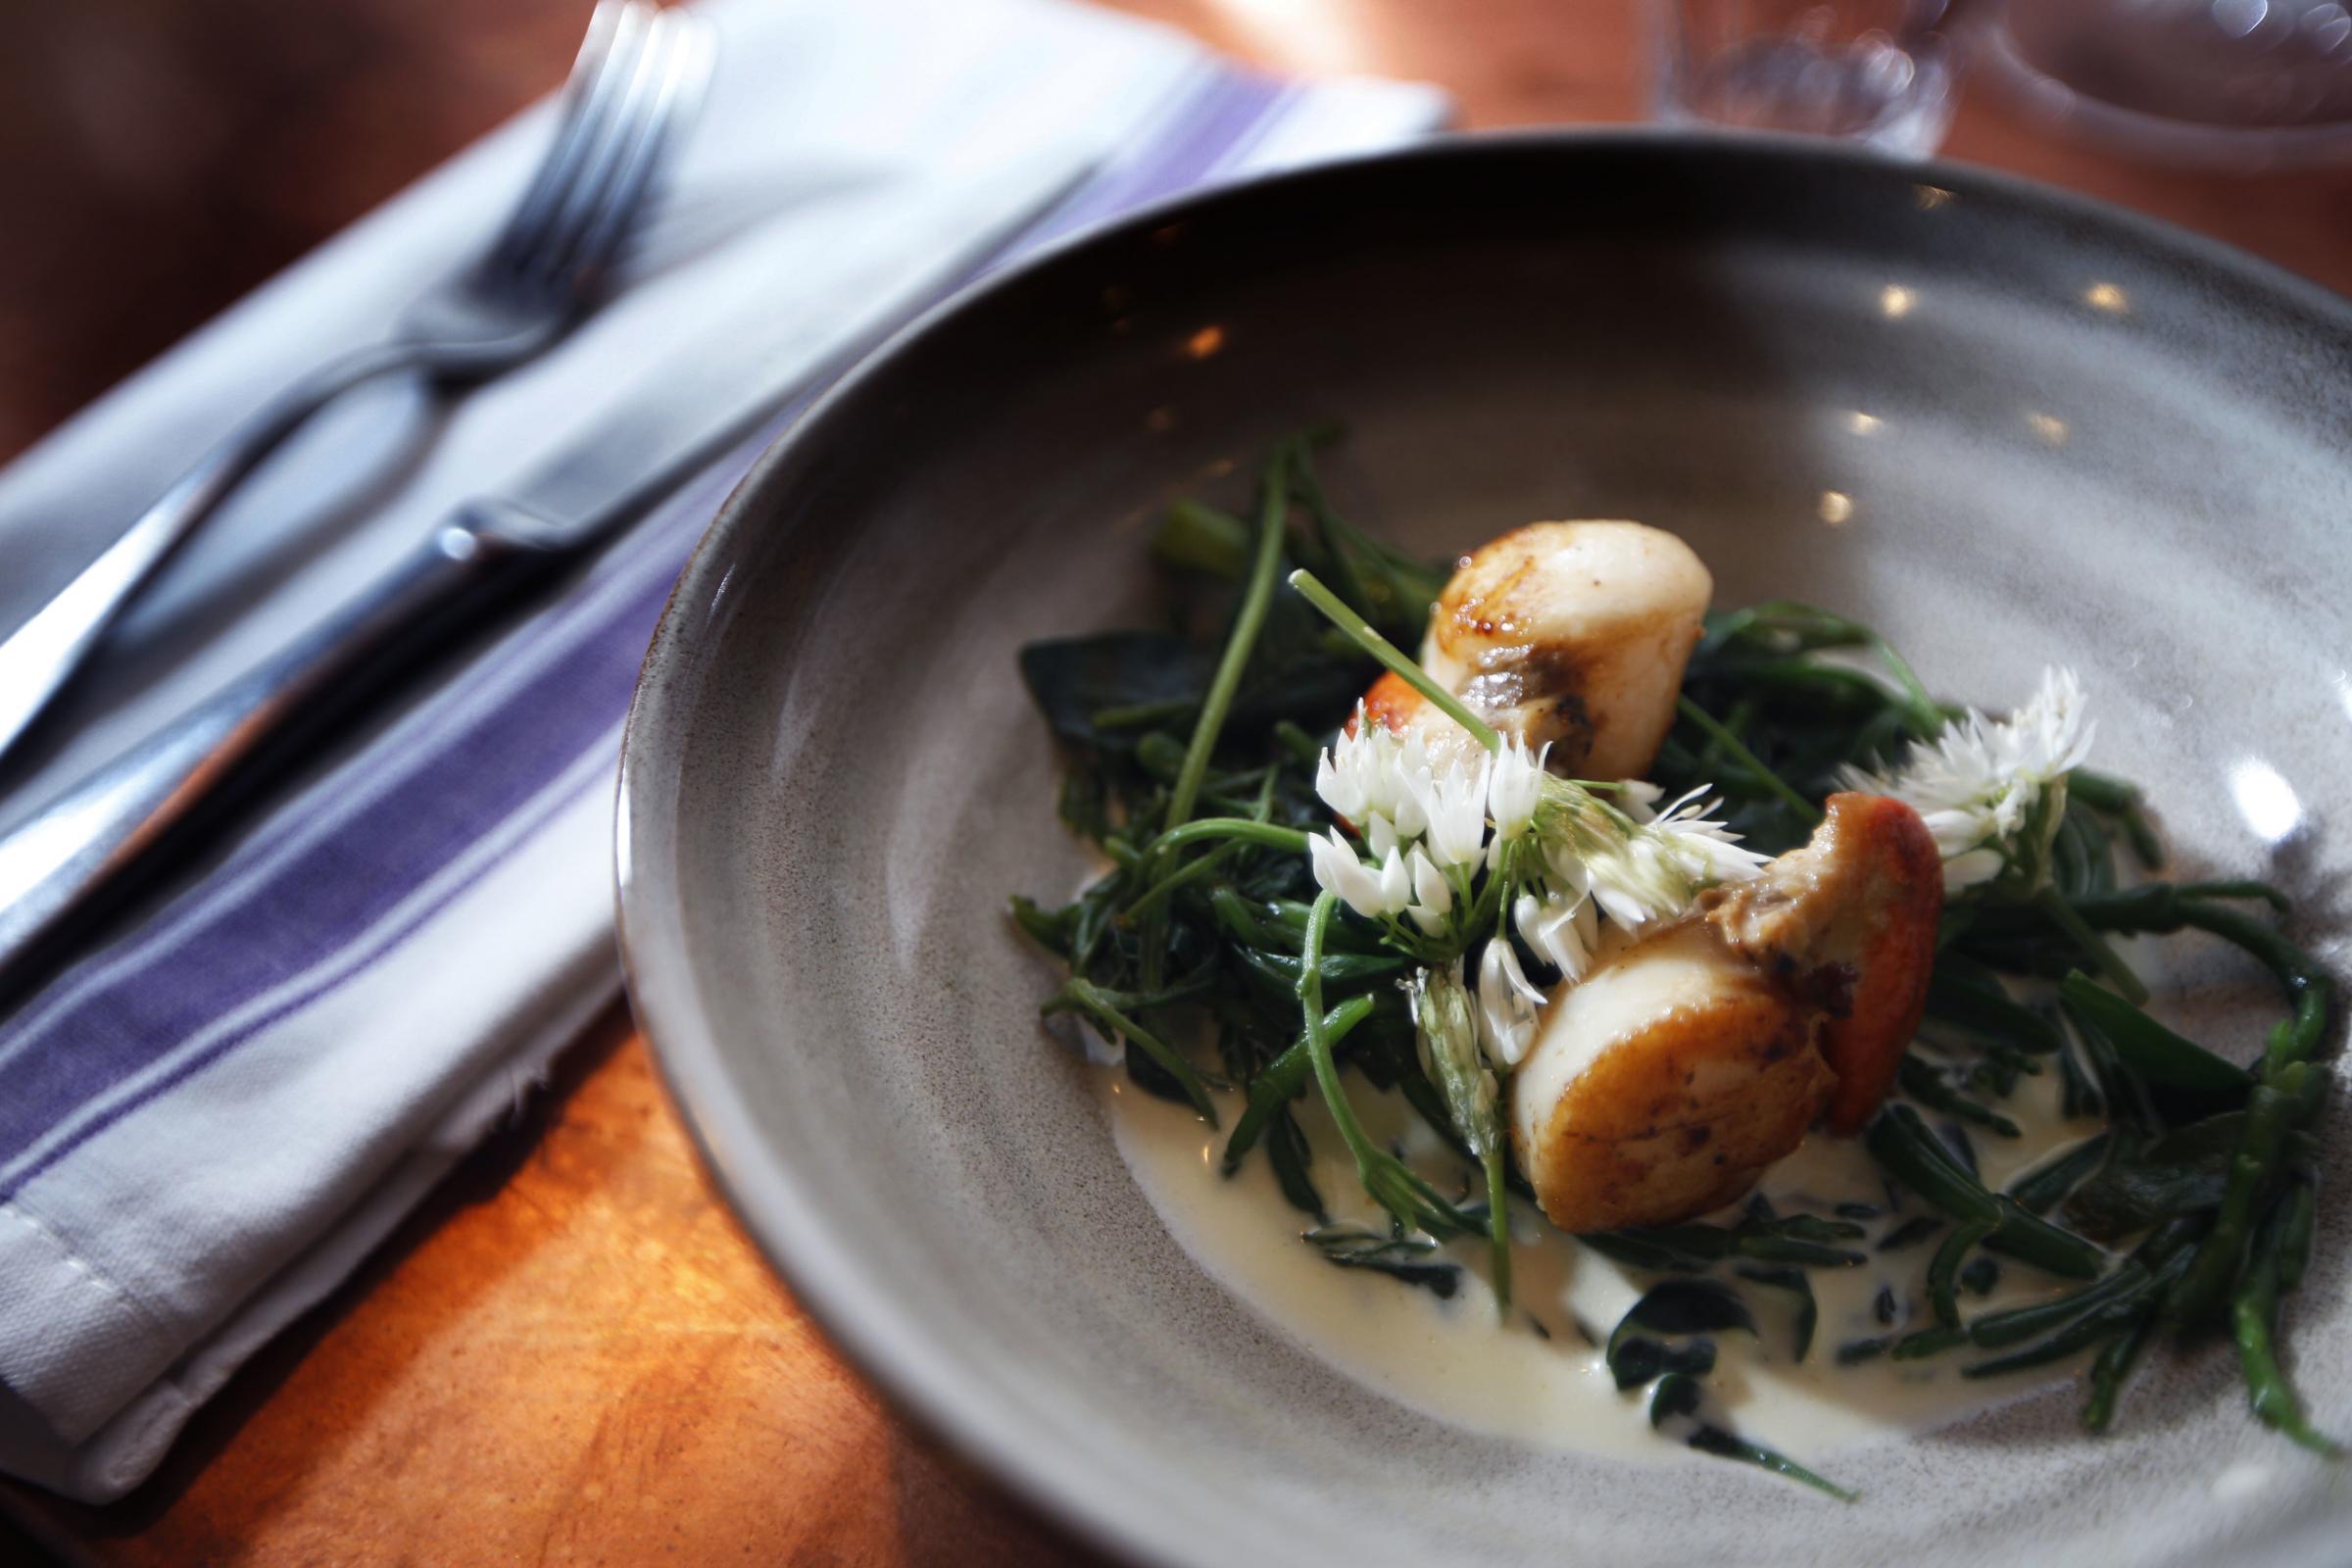 Seared scallops with sea vegetables and garlic flower. Picture by Ed Nix